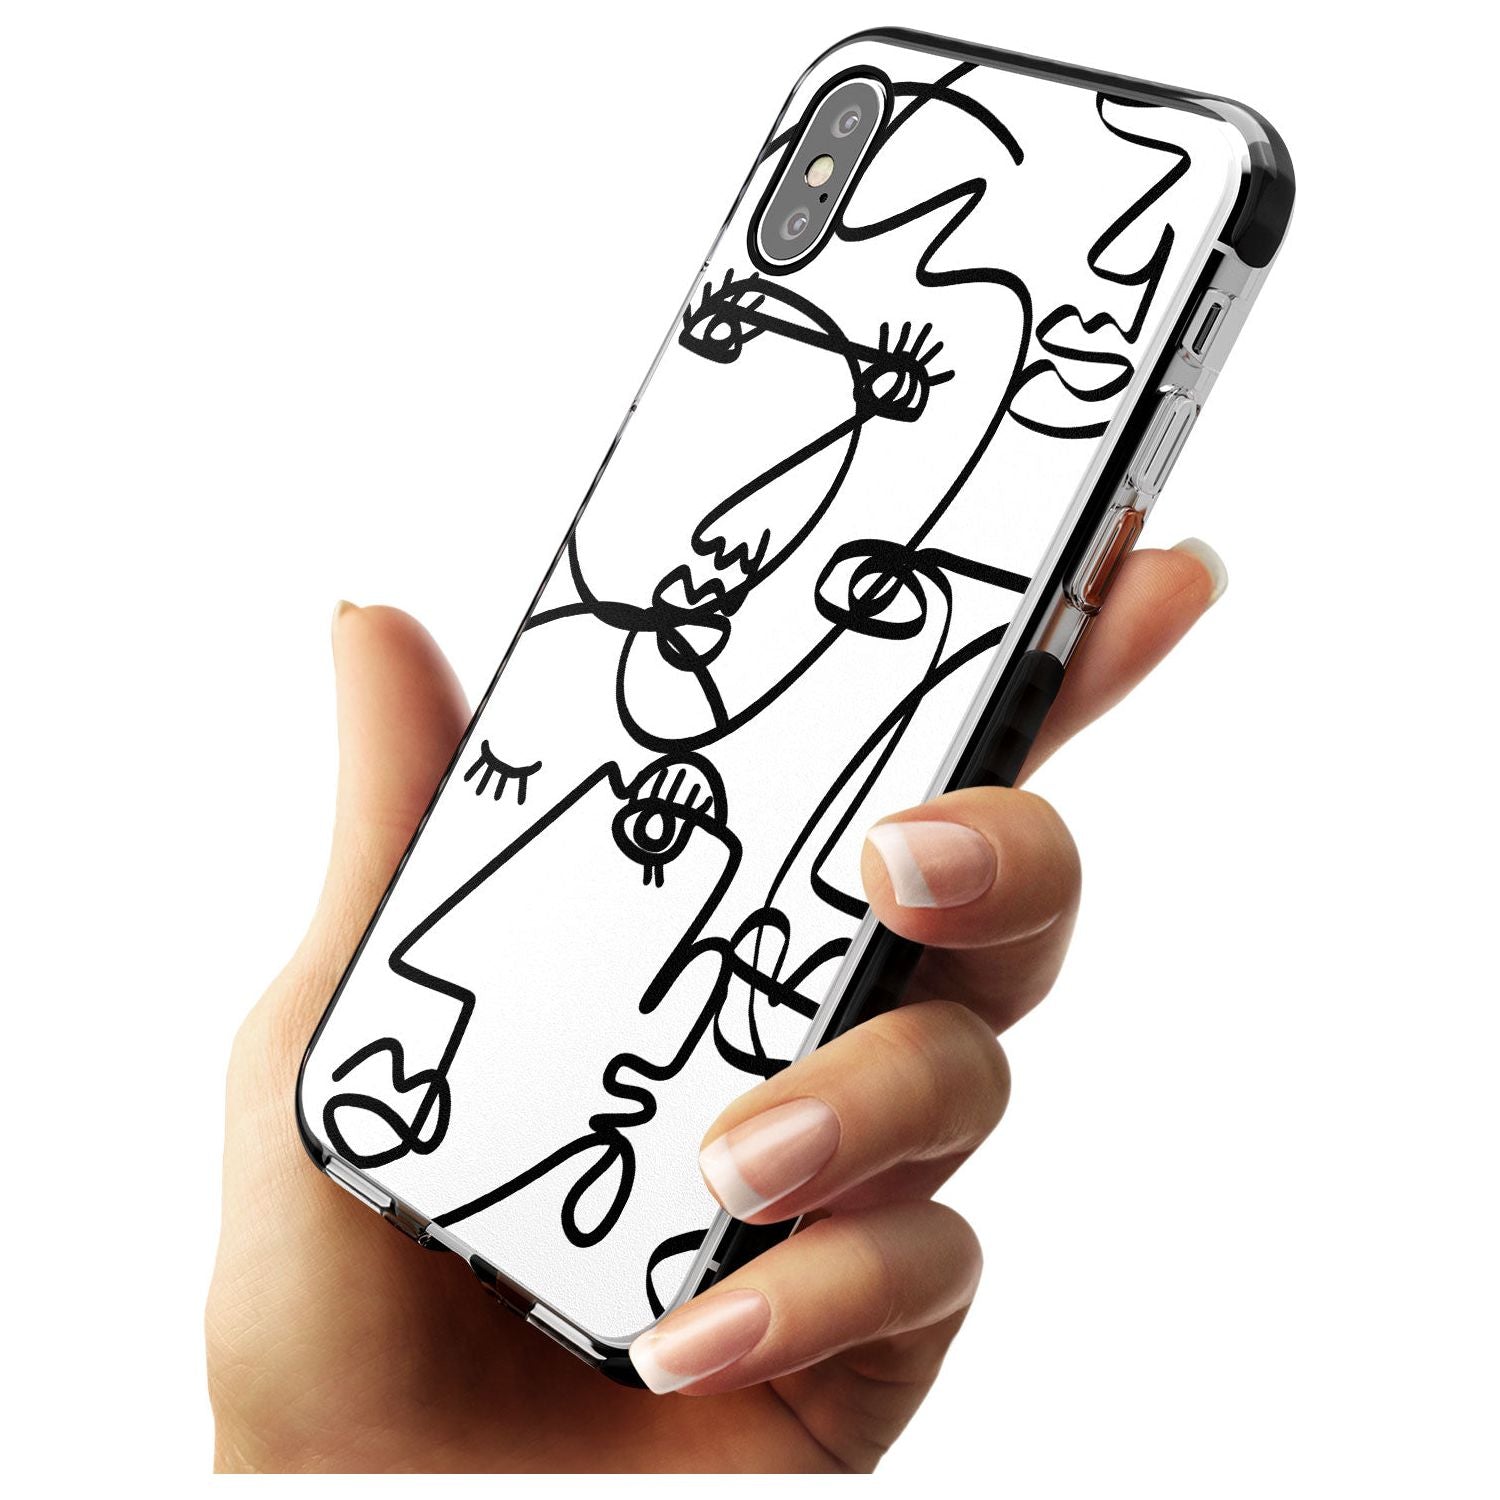 Continuous Line Faces: Black on White Pink Fade Impact Phone Case for iPhone X XS Max XR